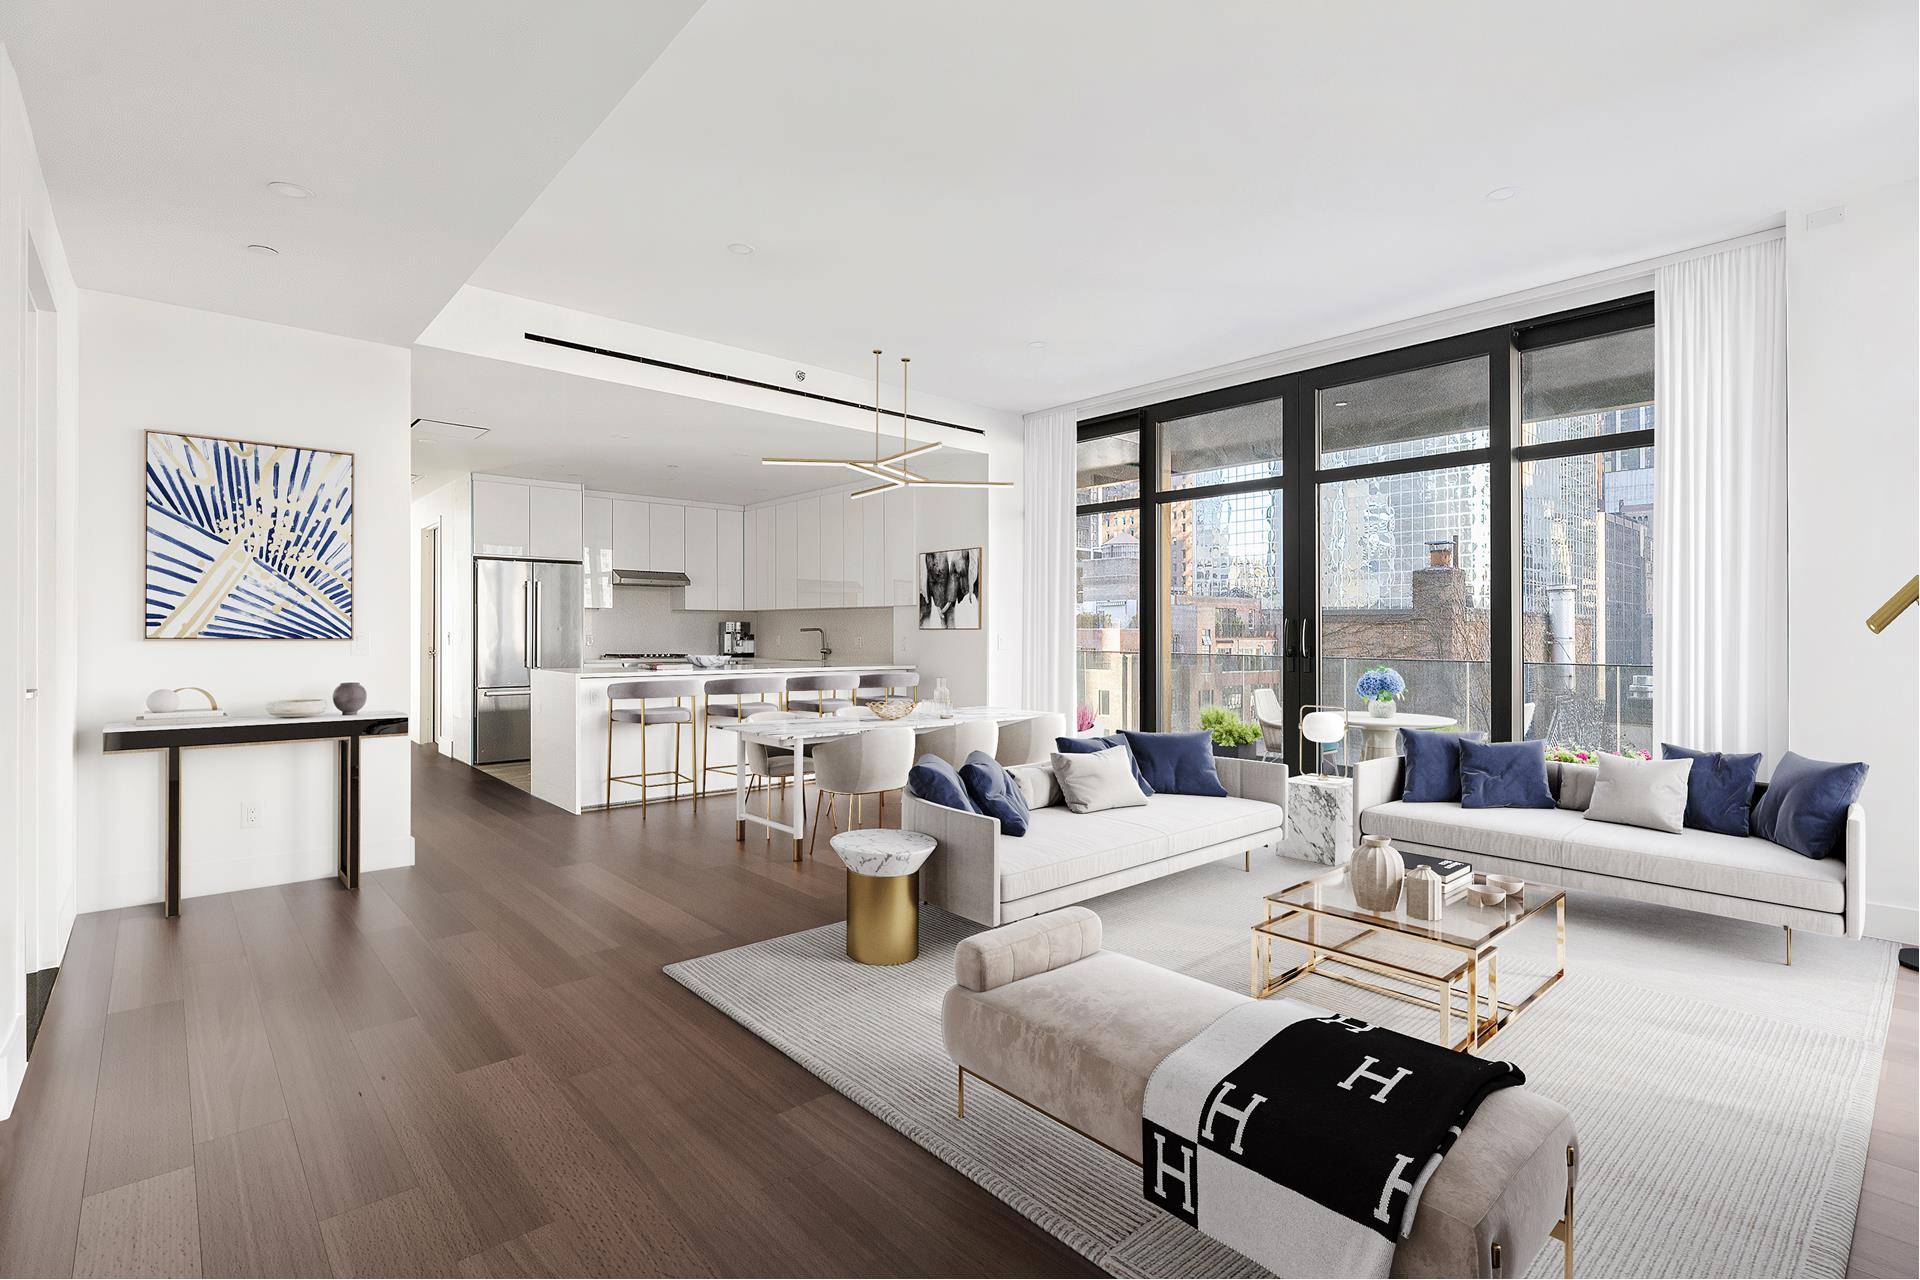 Live luxuriously in this spectacular 3 bedroom 3 bathroom Midtown East apartment with 2 fabulous outdoor spaces in the brand new boutique condominium, 249 East 50th Street.